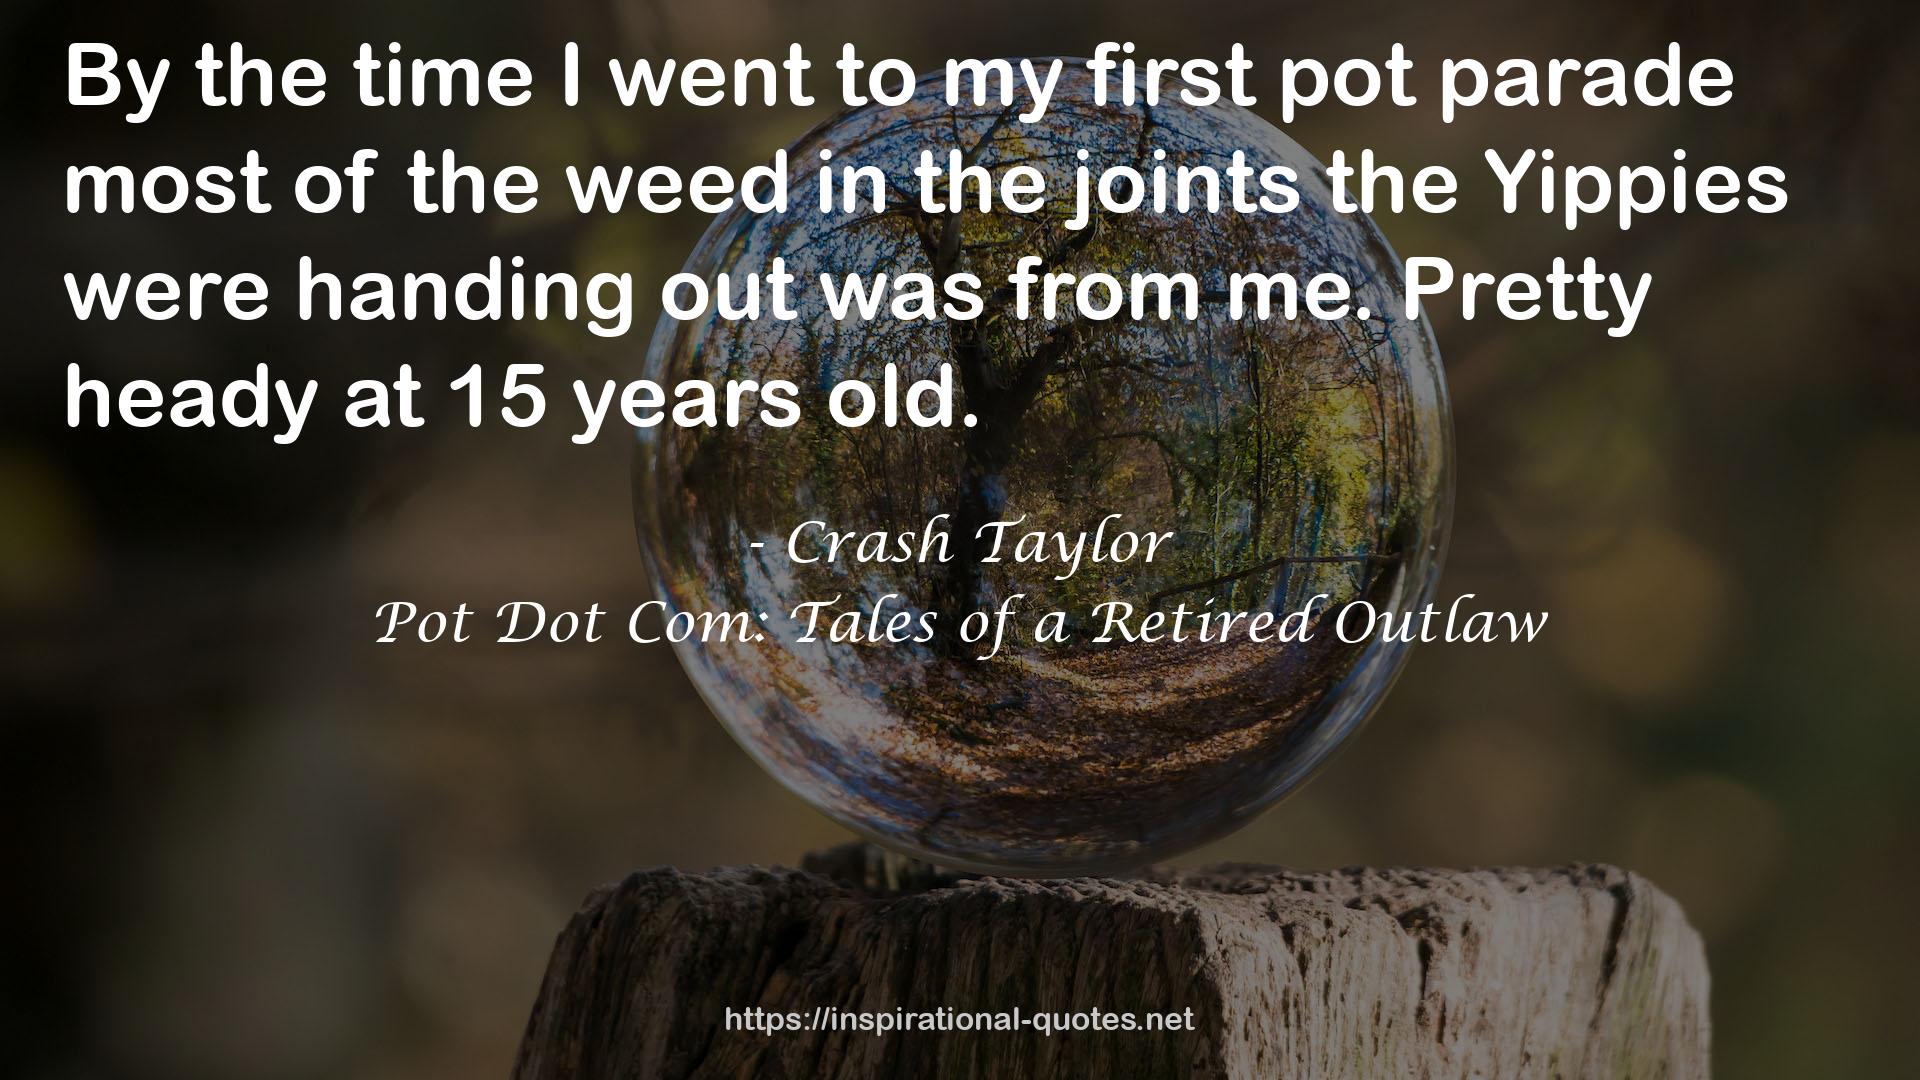 Pot Dot Com: Tales of a Retired Outlaw QUOTES